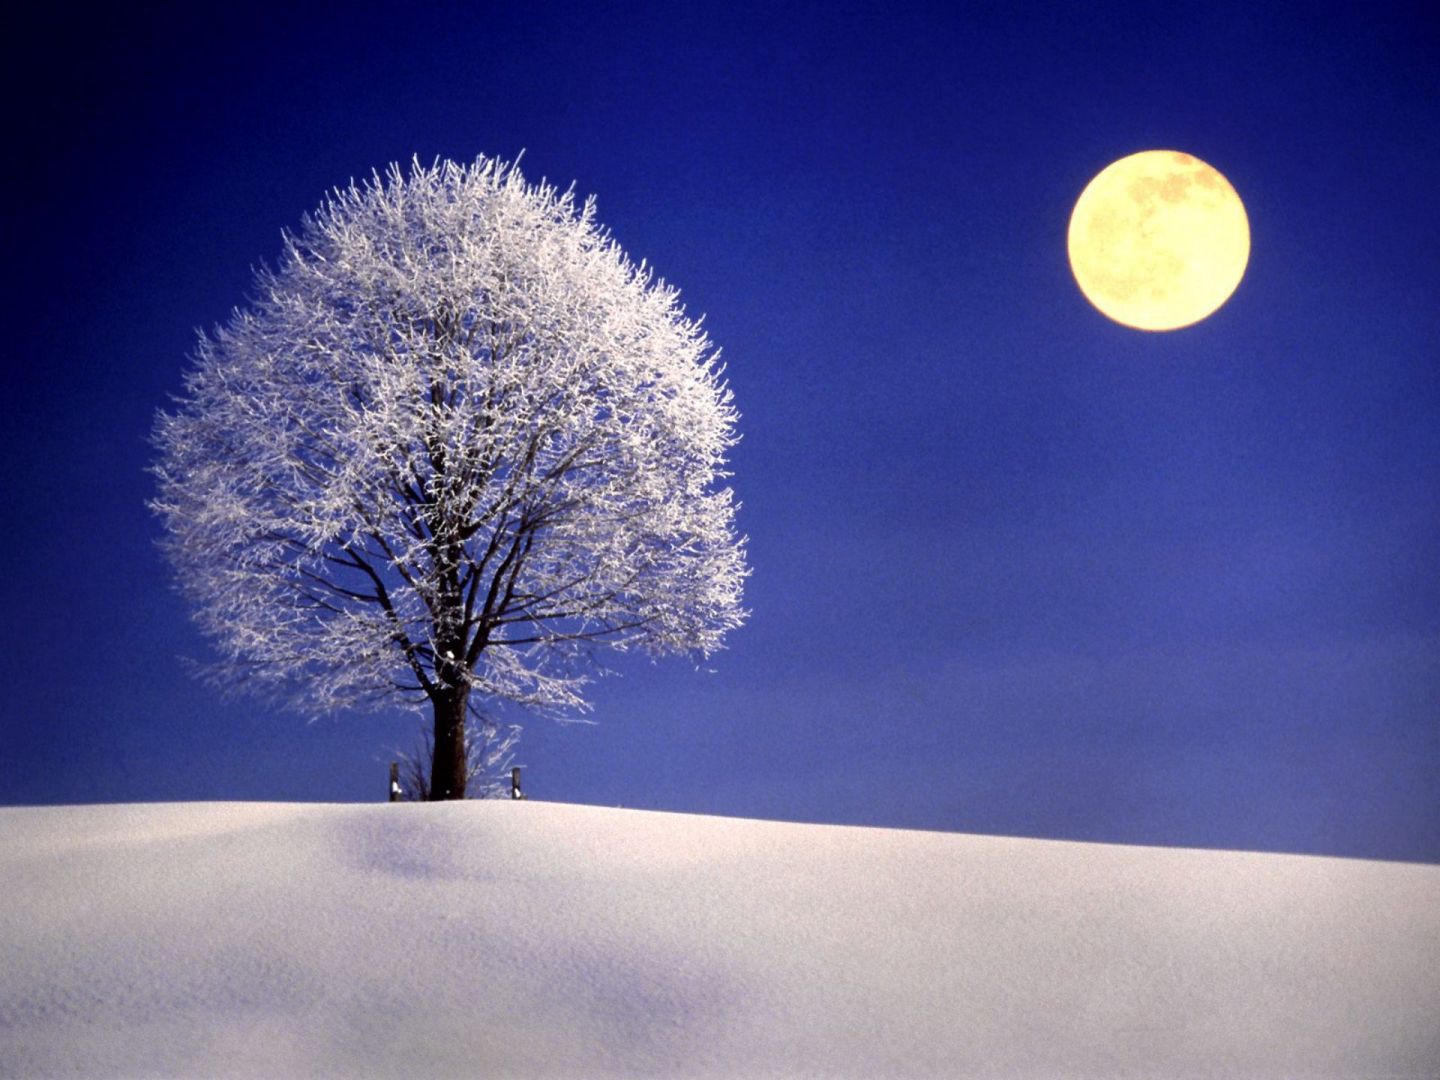 Moon in Winter Background. Awesome Moon Wallpaper, Pretty Moon Wallpaper and Moon Wallpaper